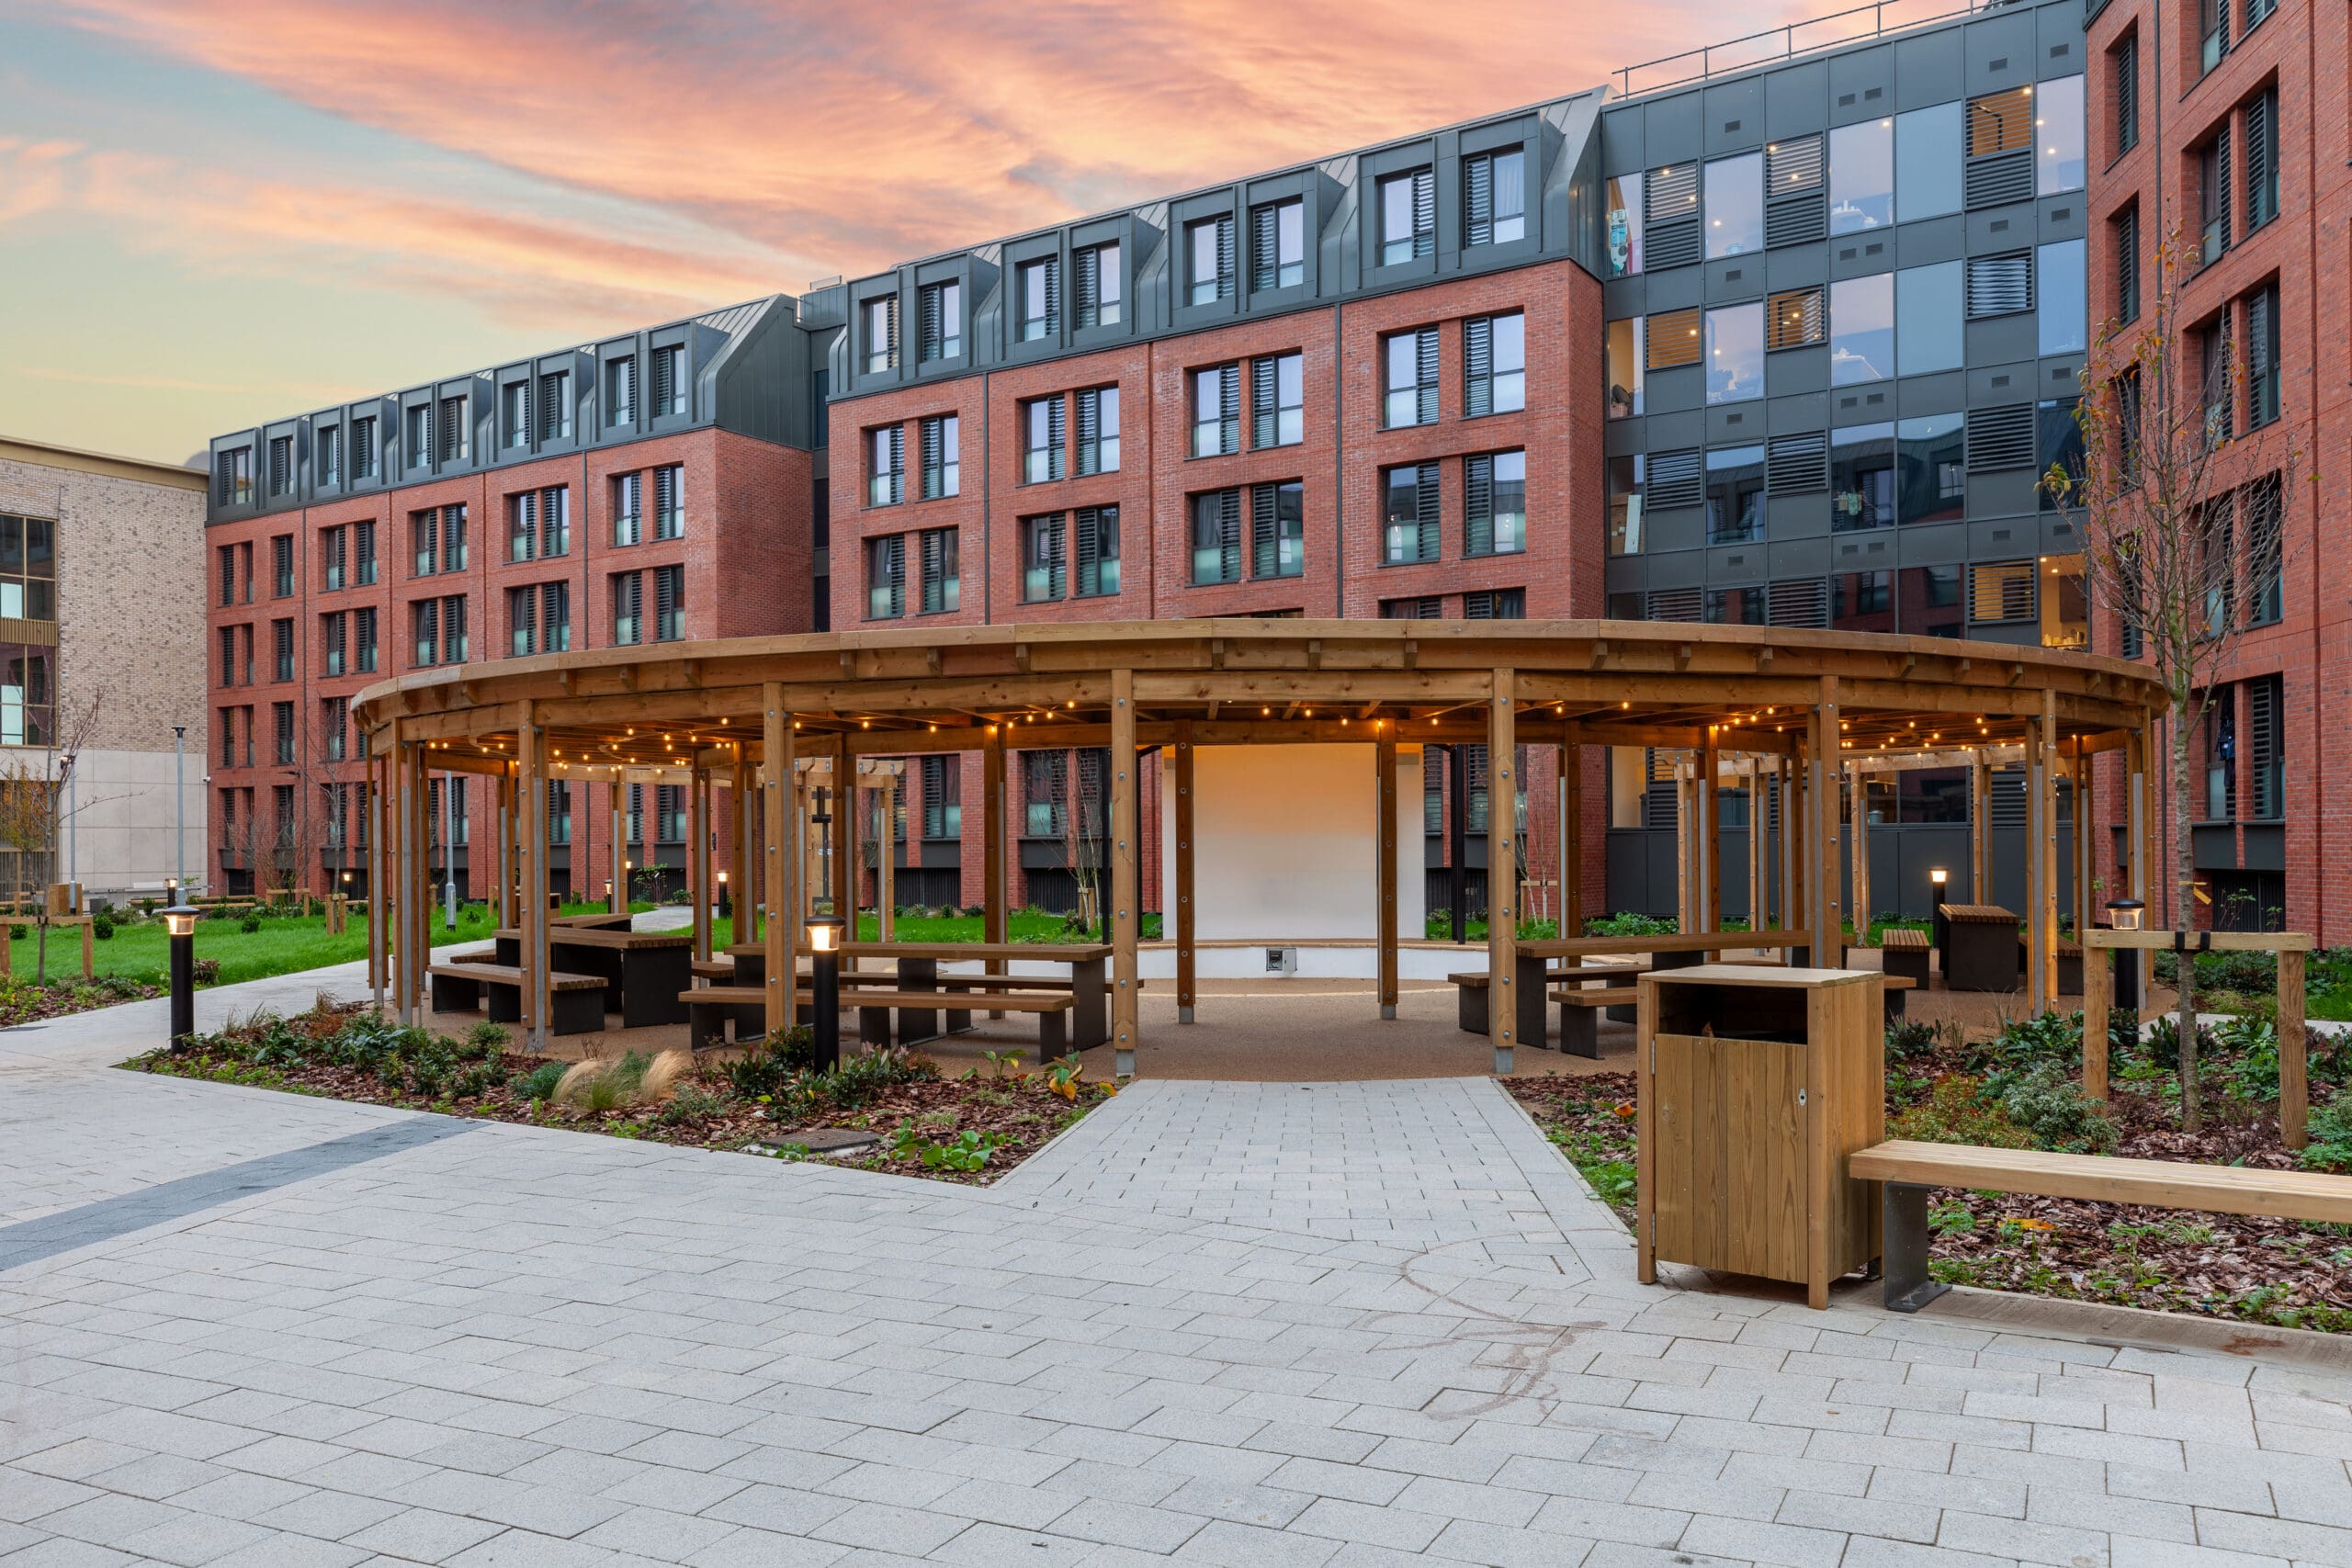 Modern building, with the sun setting in the background. Wooden canopy with benches and fairy lights. 